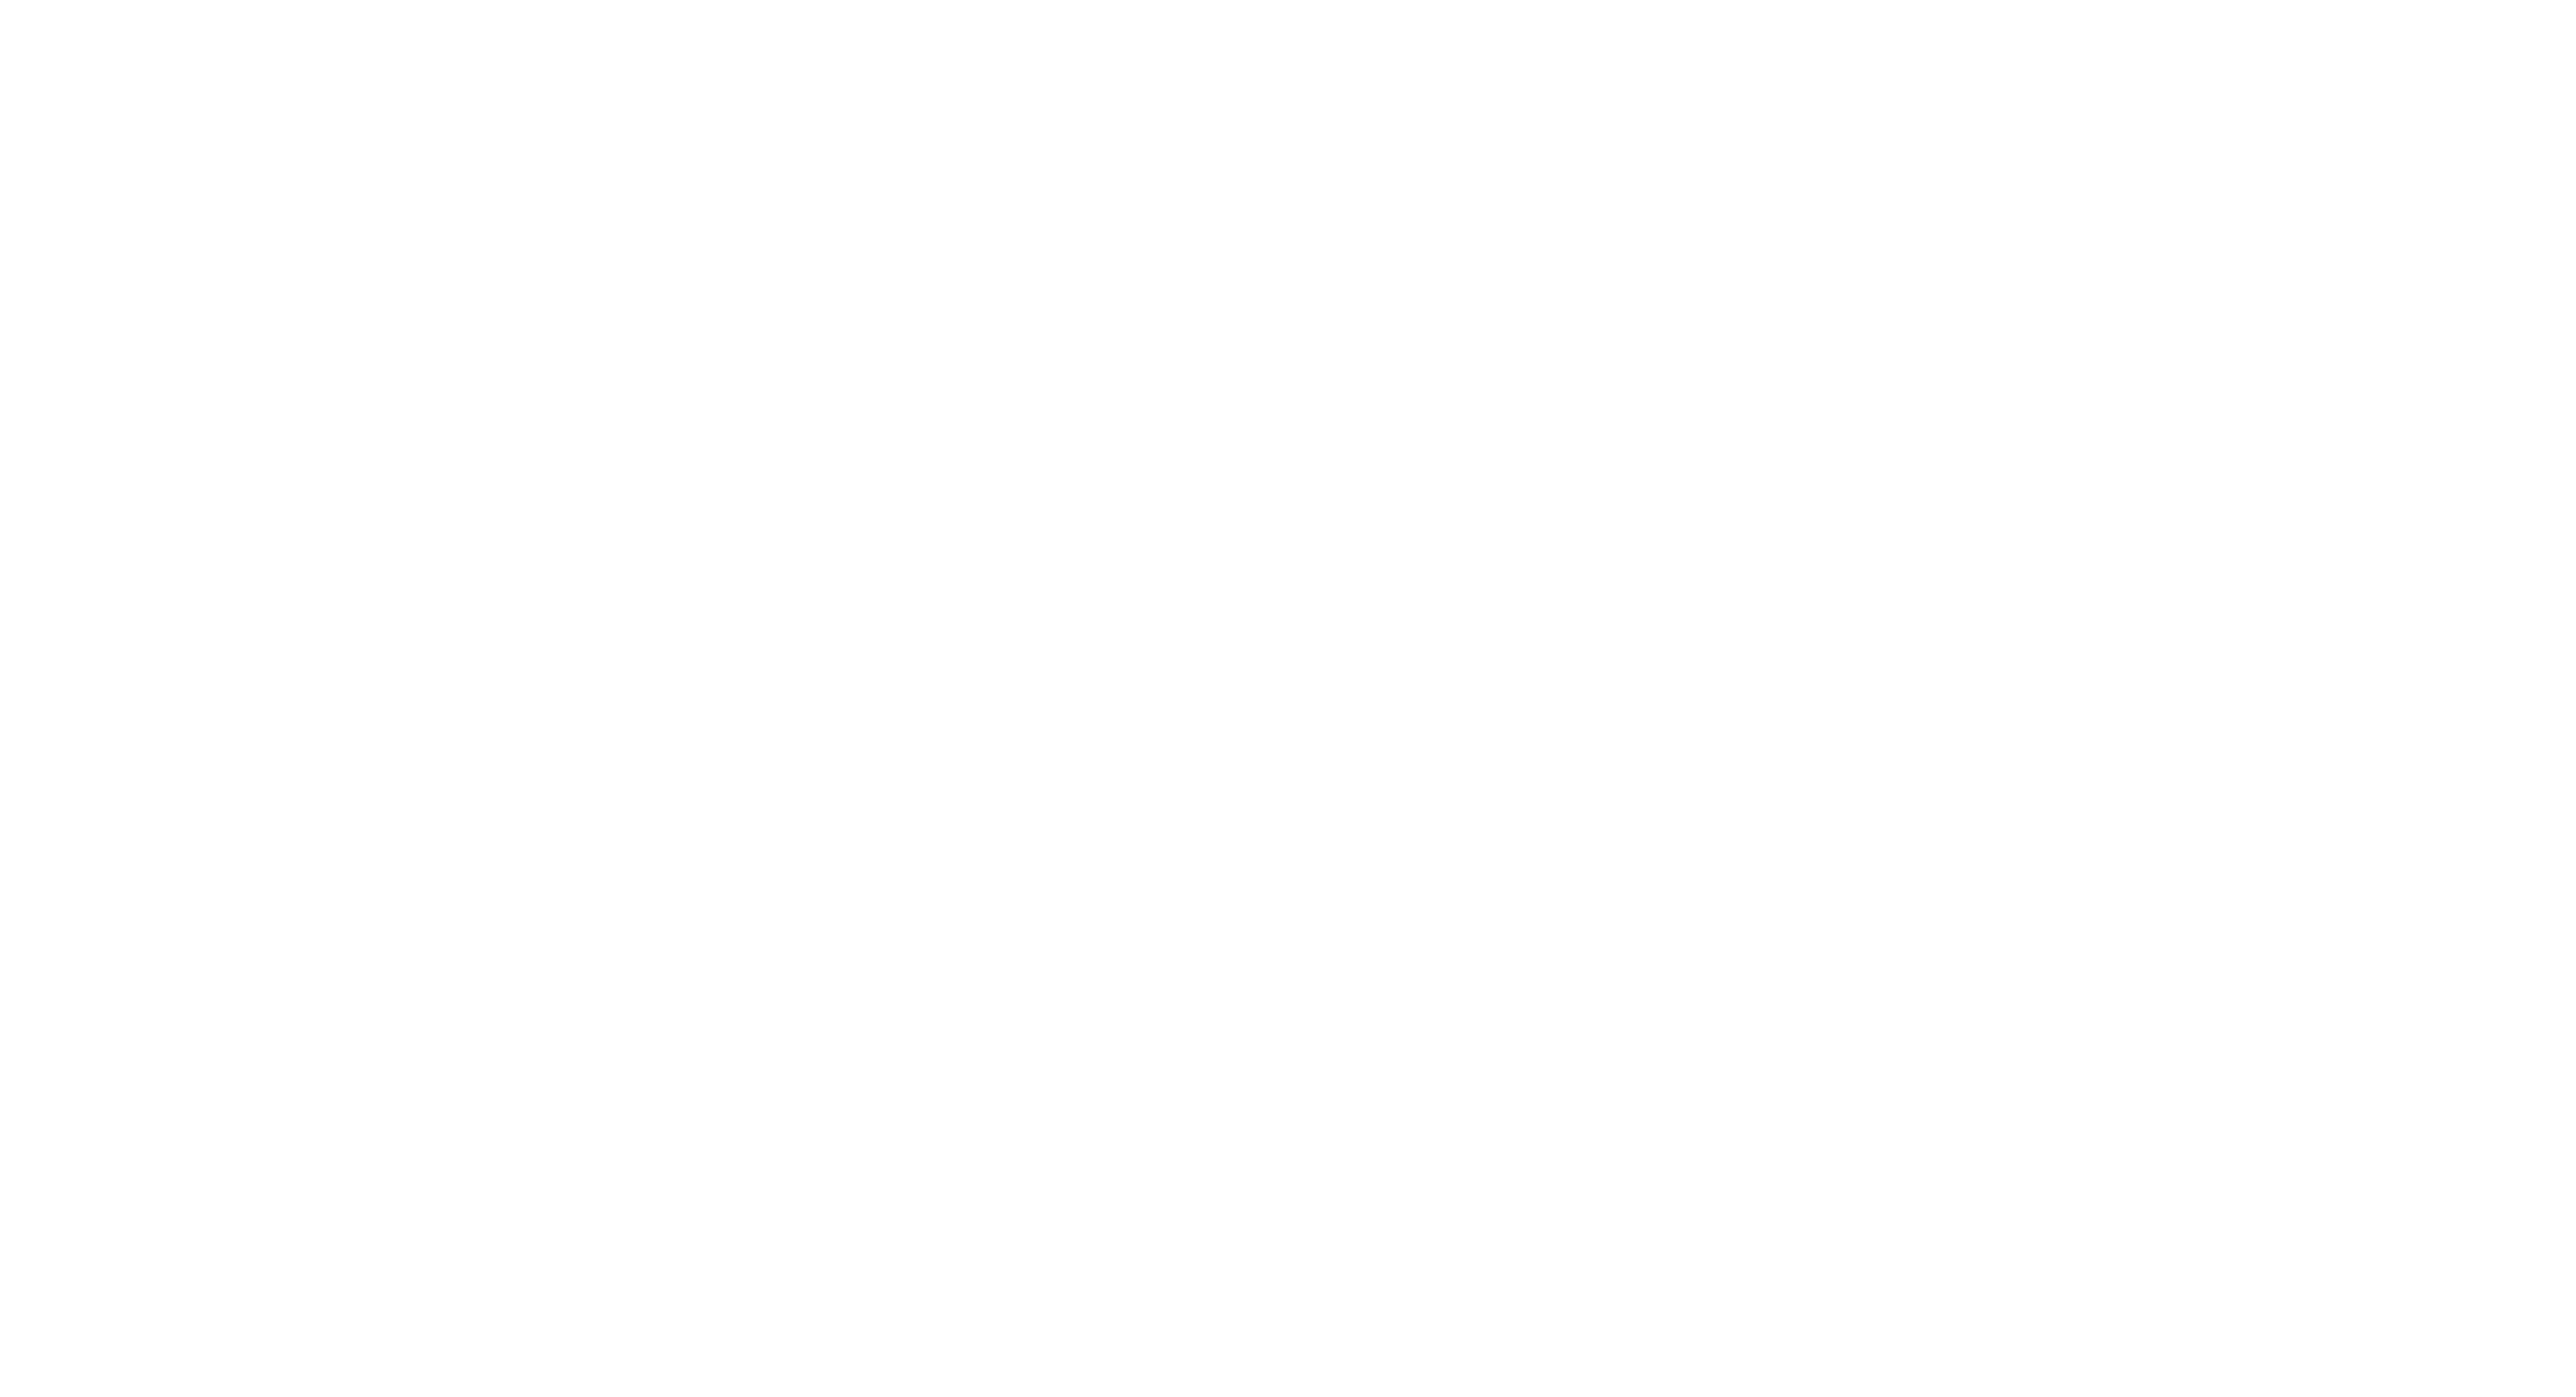 Stacia Stark: Romantasy that rips you apart and puts you back together